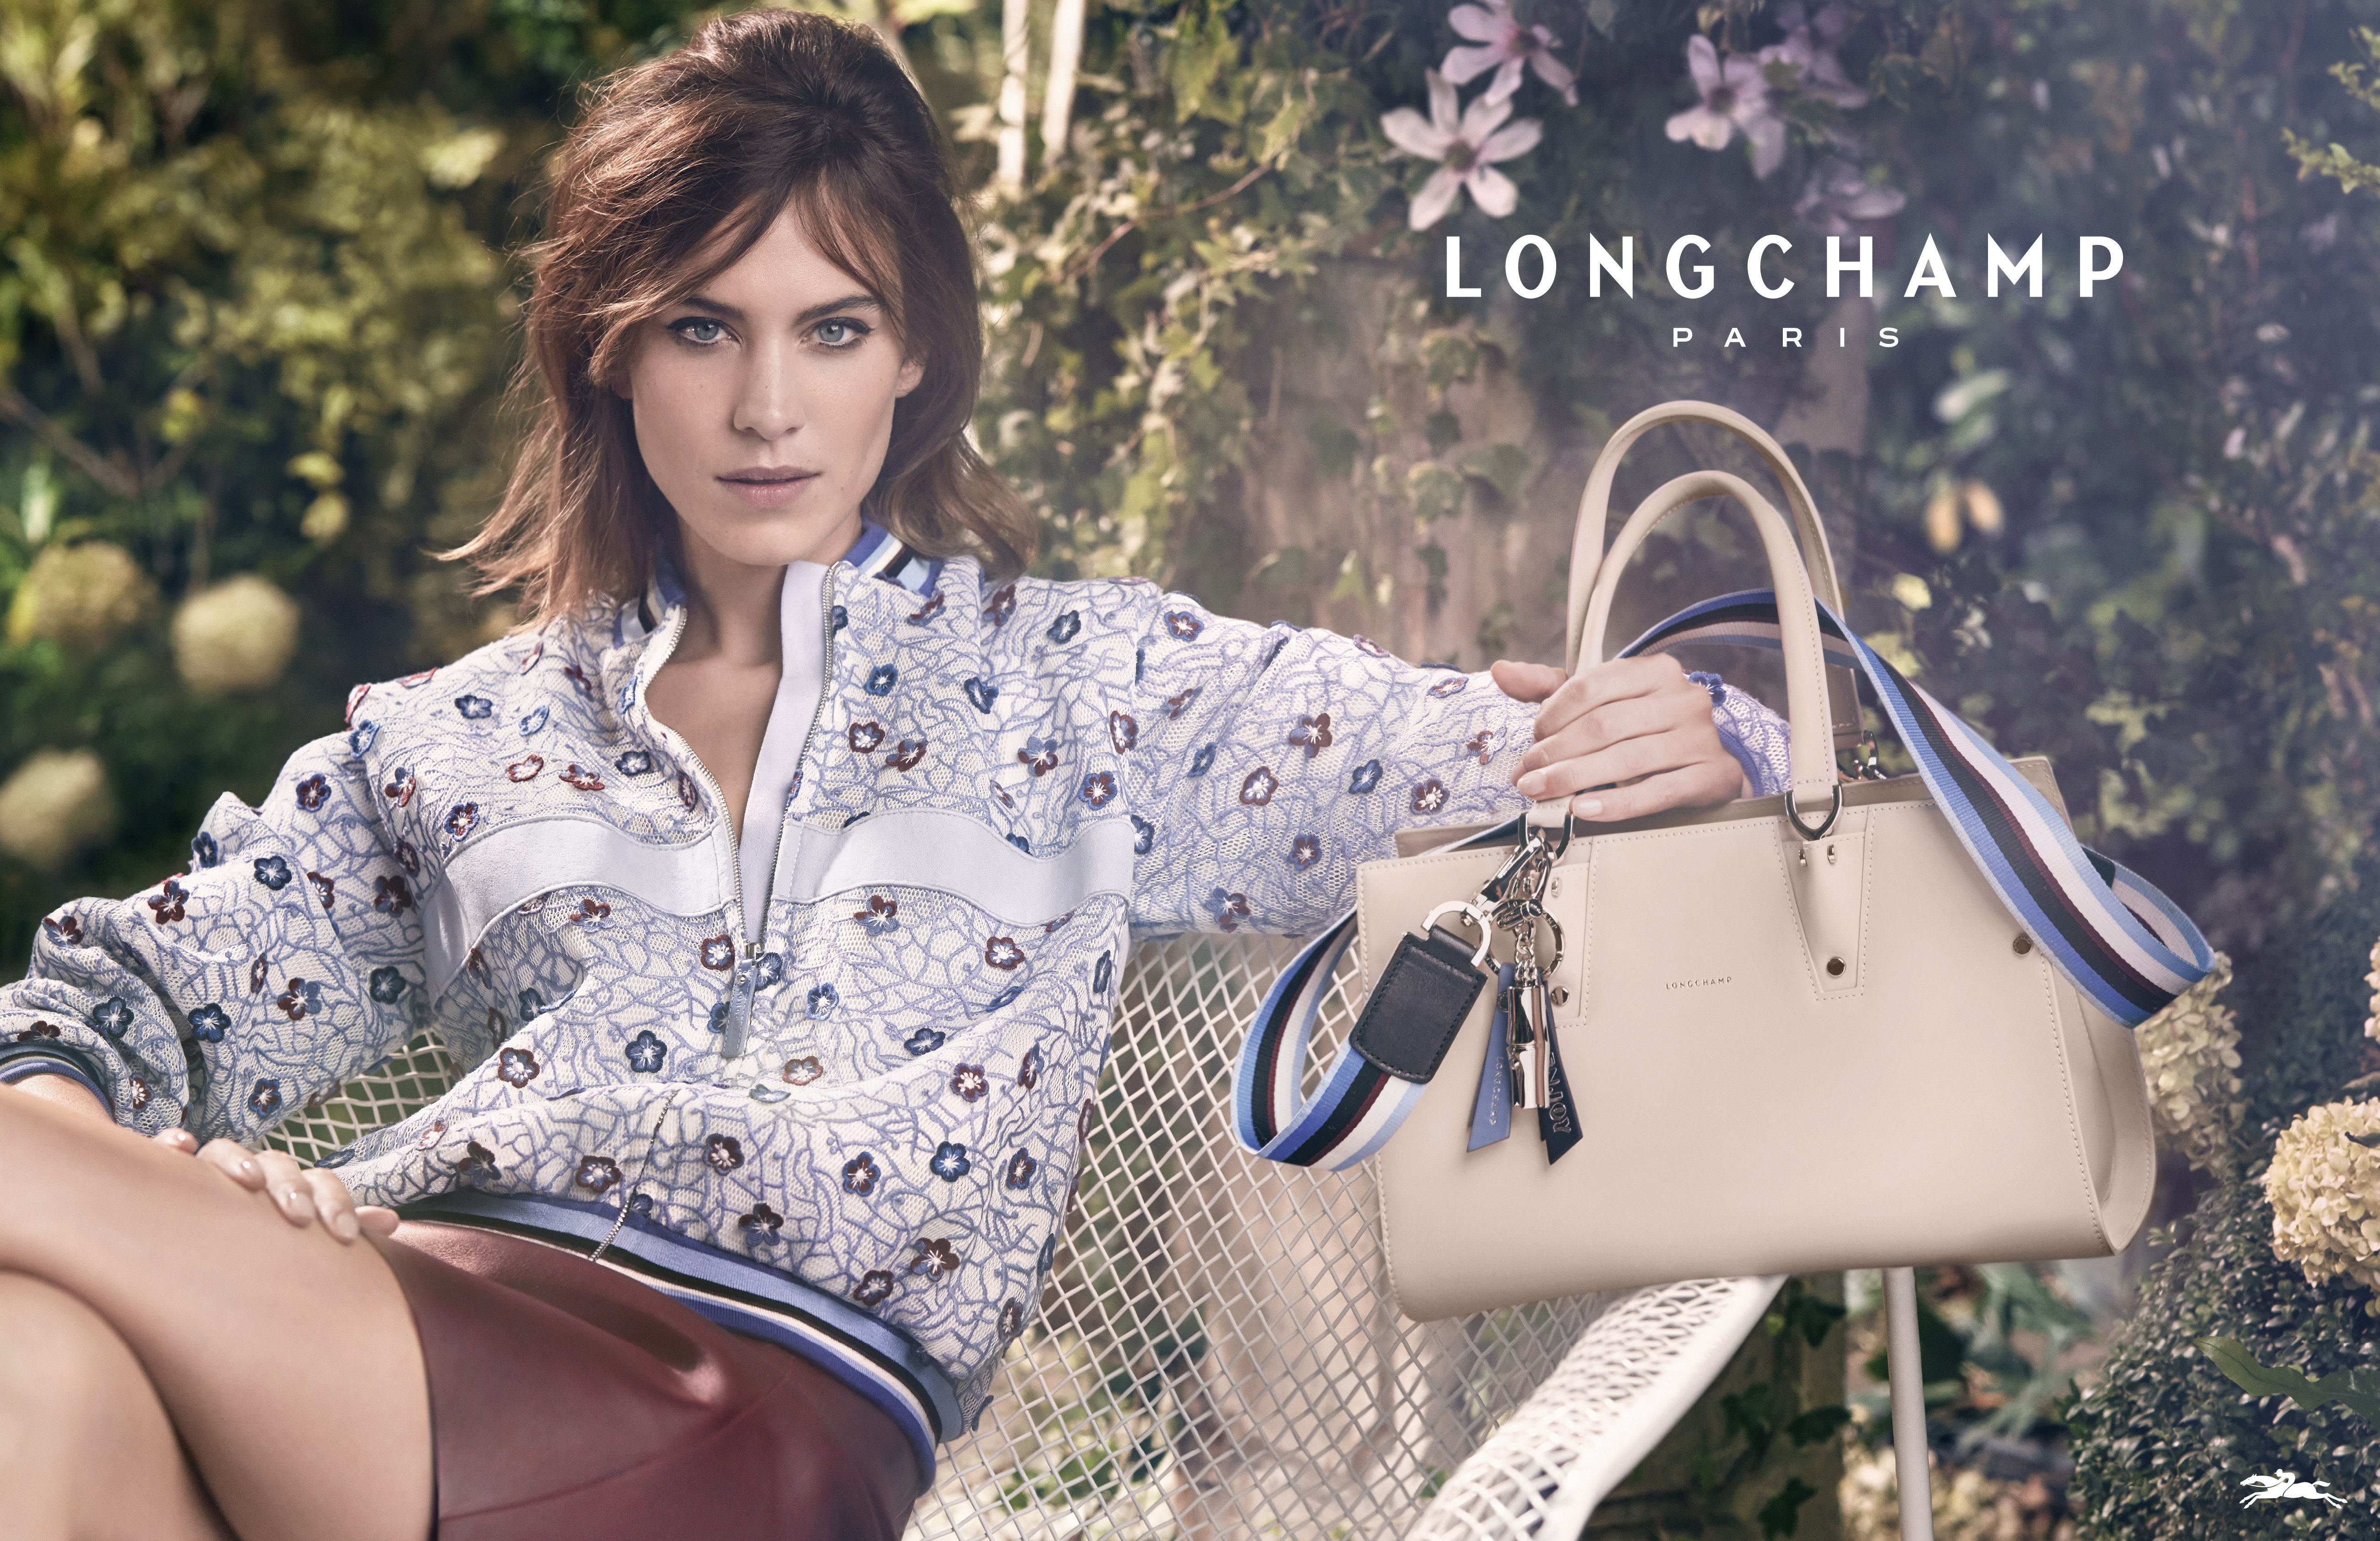 Alexa Chung stars as picture-perfect Parisian in Longchamp's spring campaign